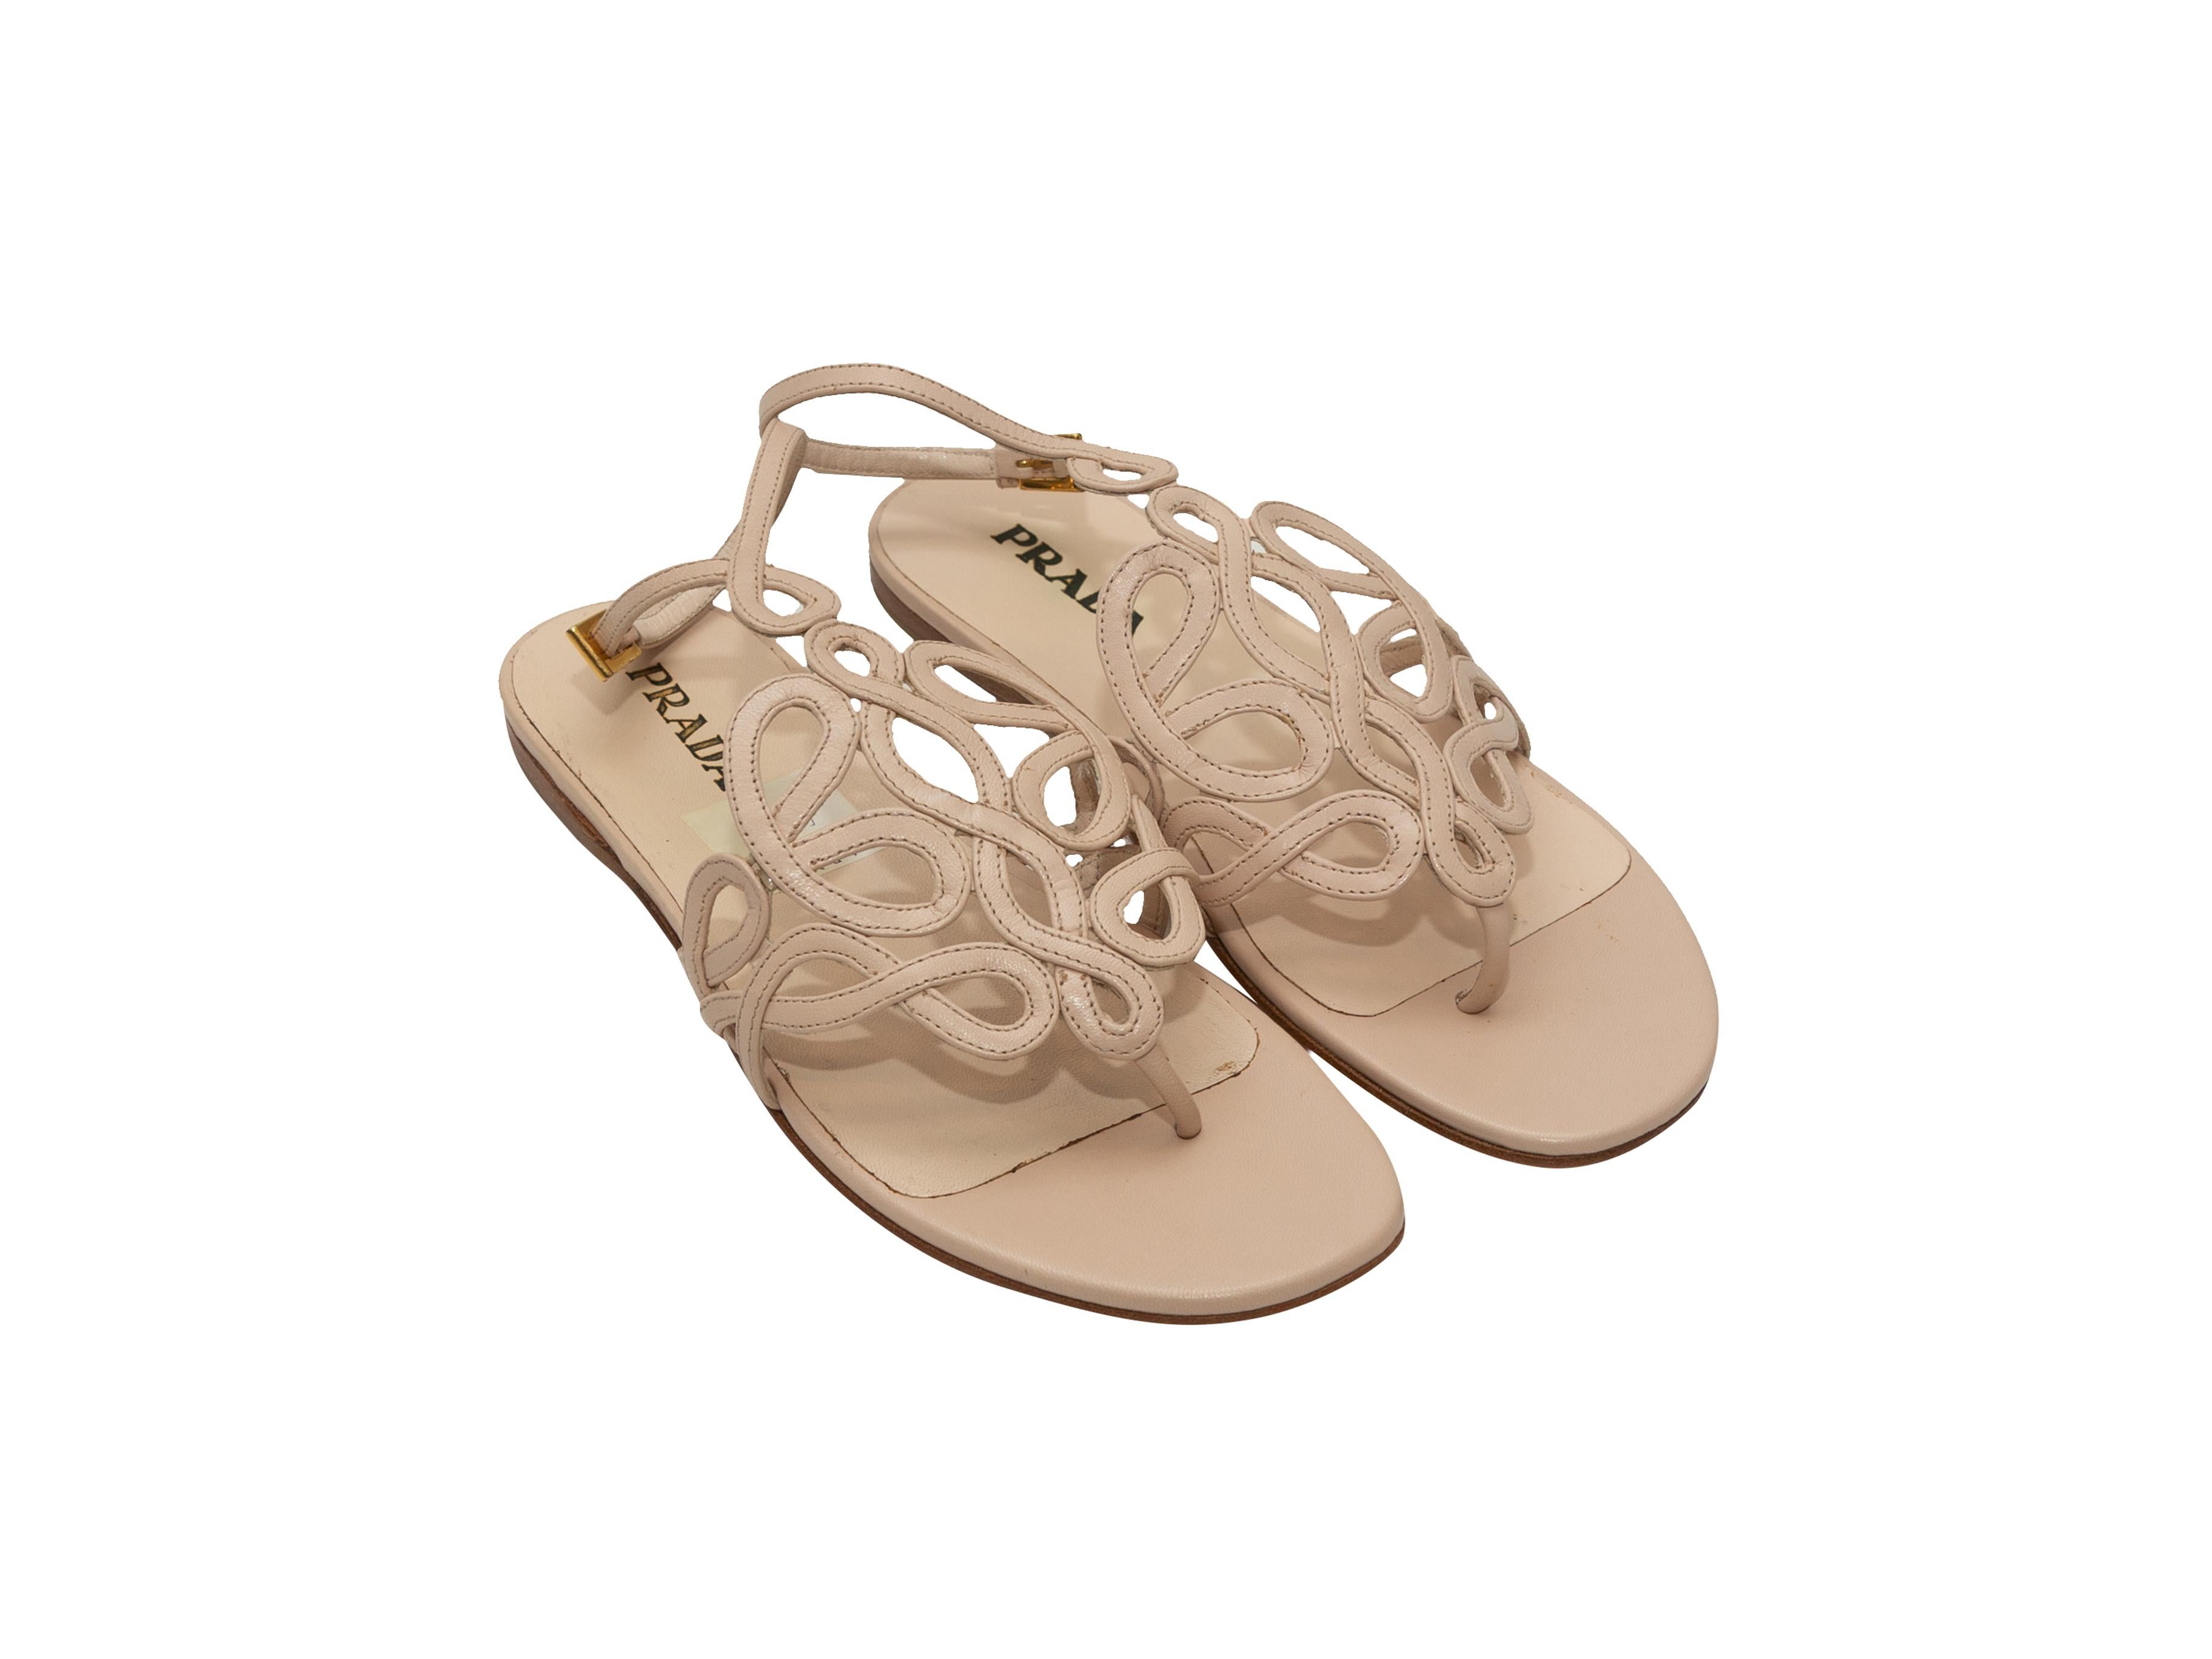 Product details: Beige leather flat thong sandals by Prada. Gold-tone buckle closures at ankle straps. Designer size 36.5.
Condition: Pre-owned. Excellent.